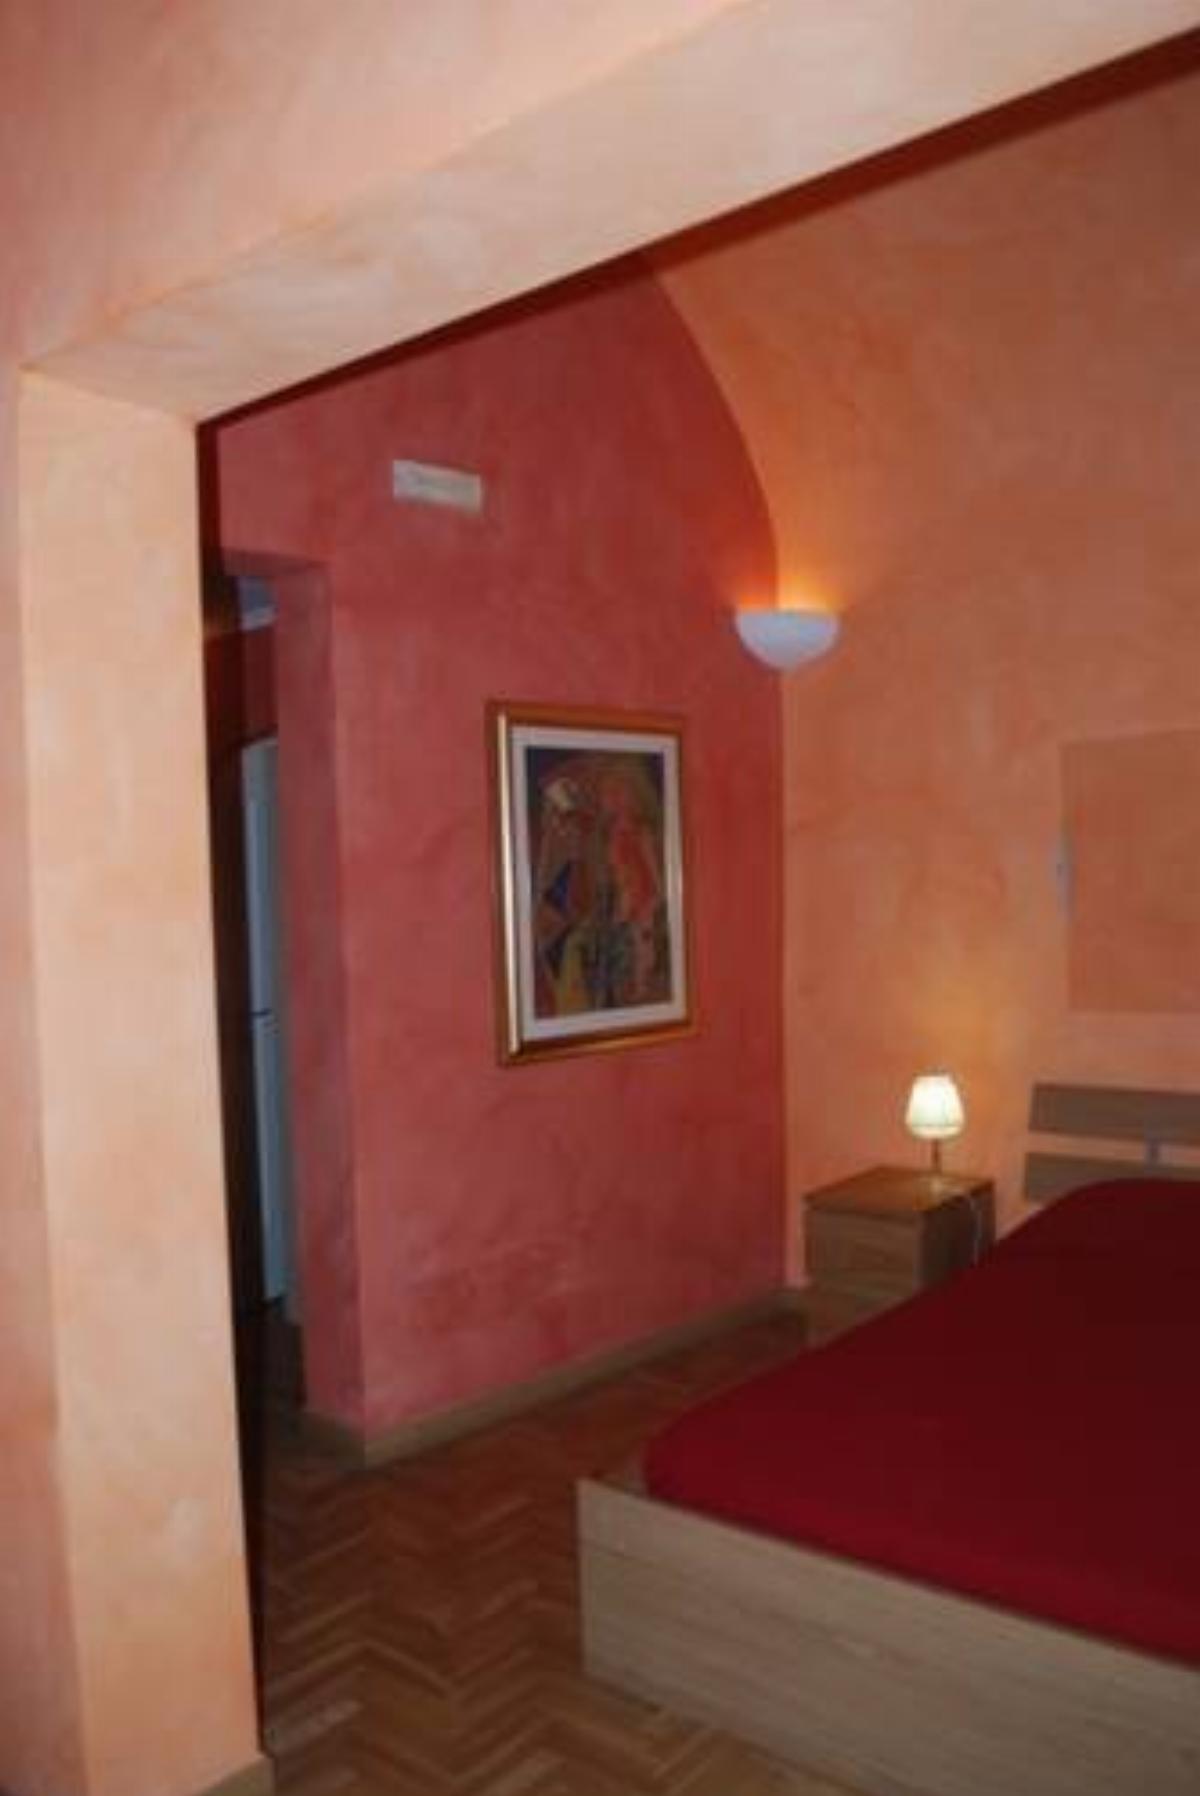 Bed and Breakfast Bonomi Hotel Bisceglie Italy